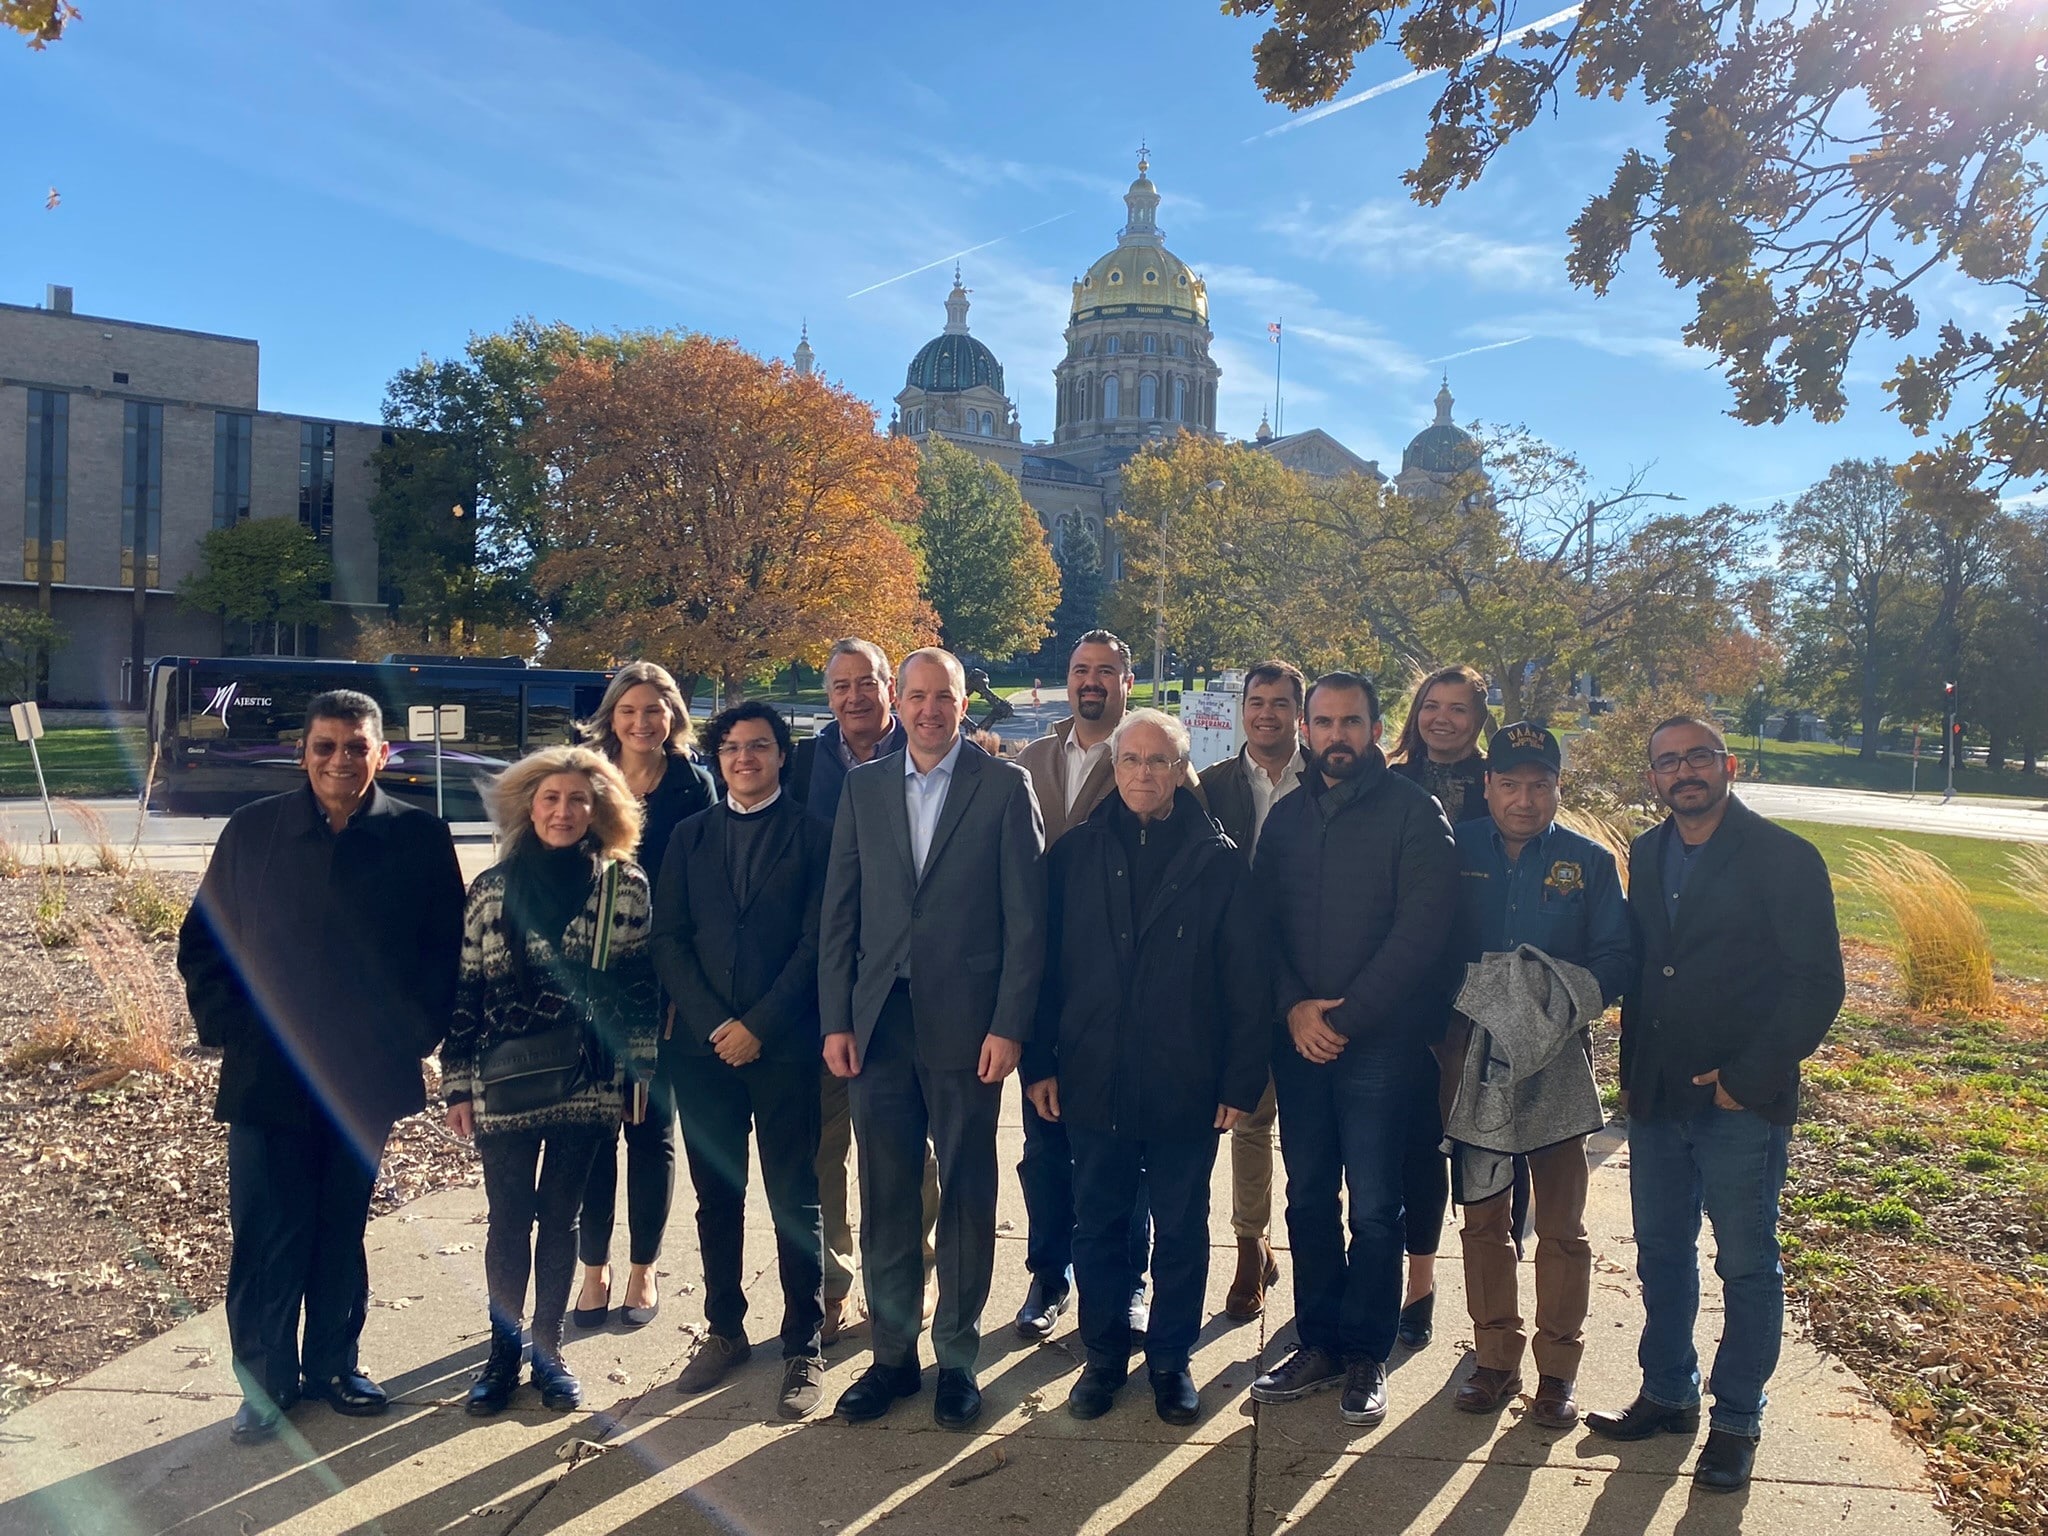 A group of representatives from 10 Mexican companies recently visited the United States to learn more about yellow corn production and the advantages of high protein DDGS. The team had the opportunity to meet with Iowa Secretary of Agriculture Mike Naig while there.